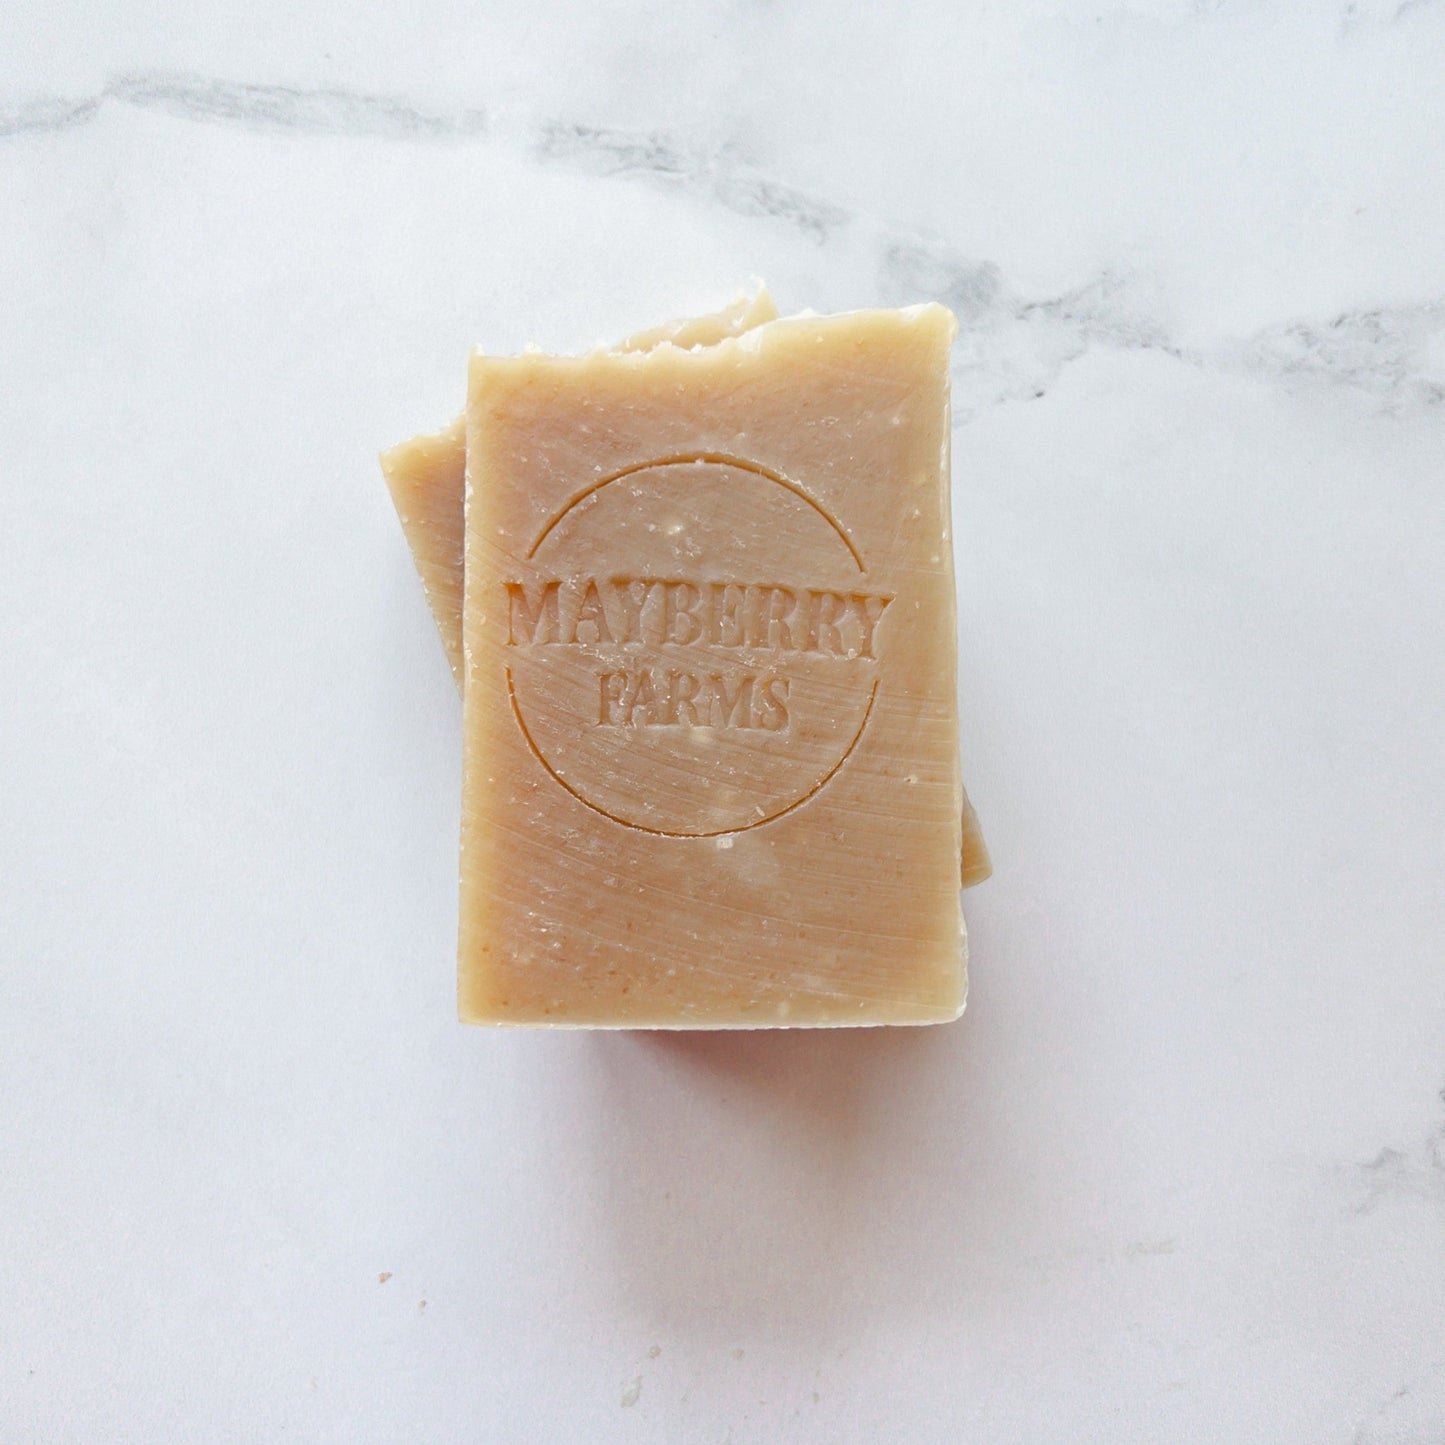 Unscented Bar Soaps For Your Whole Body - Mayberry Farms